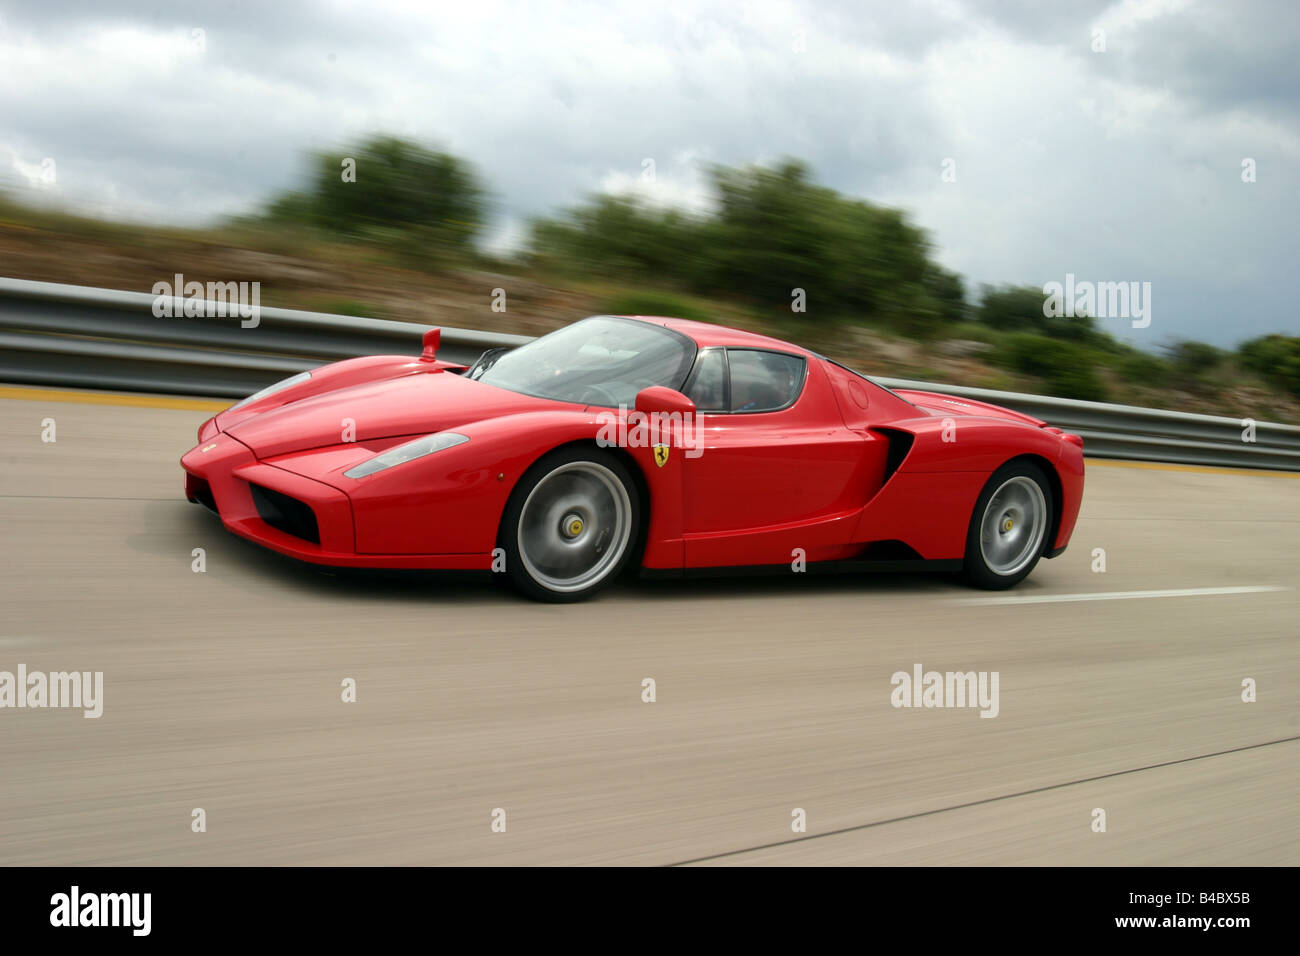 Car, Ferrari Enzo Ferrari, roadster, model year 2002-, Coupe/coupe, red, driving, diagonal from the front, side view, test track Stock Photo